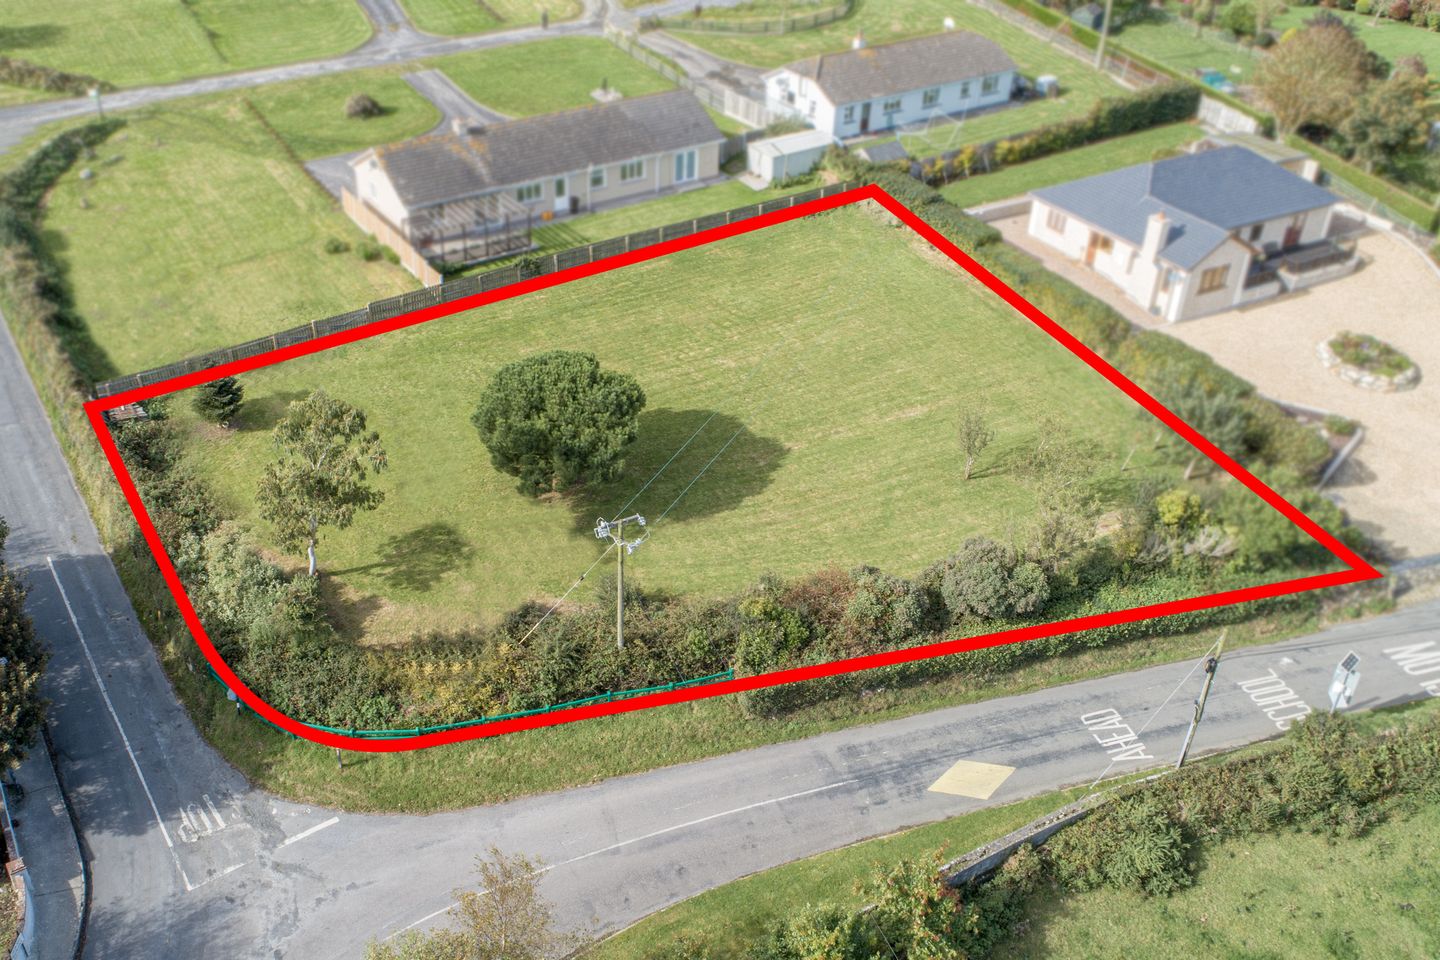 Site 9, Ballinageeragh, Dunhill, Co. Waterford